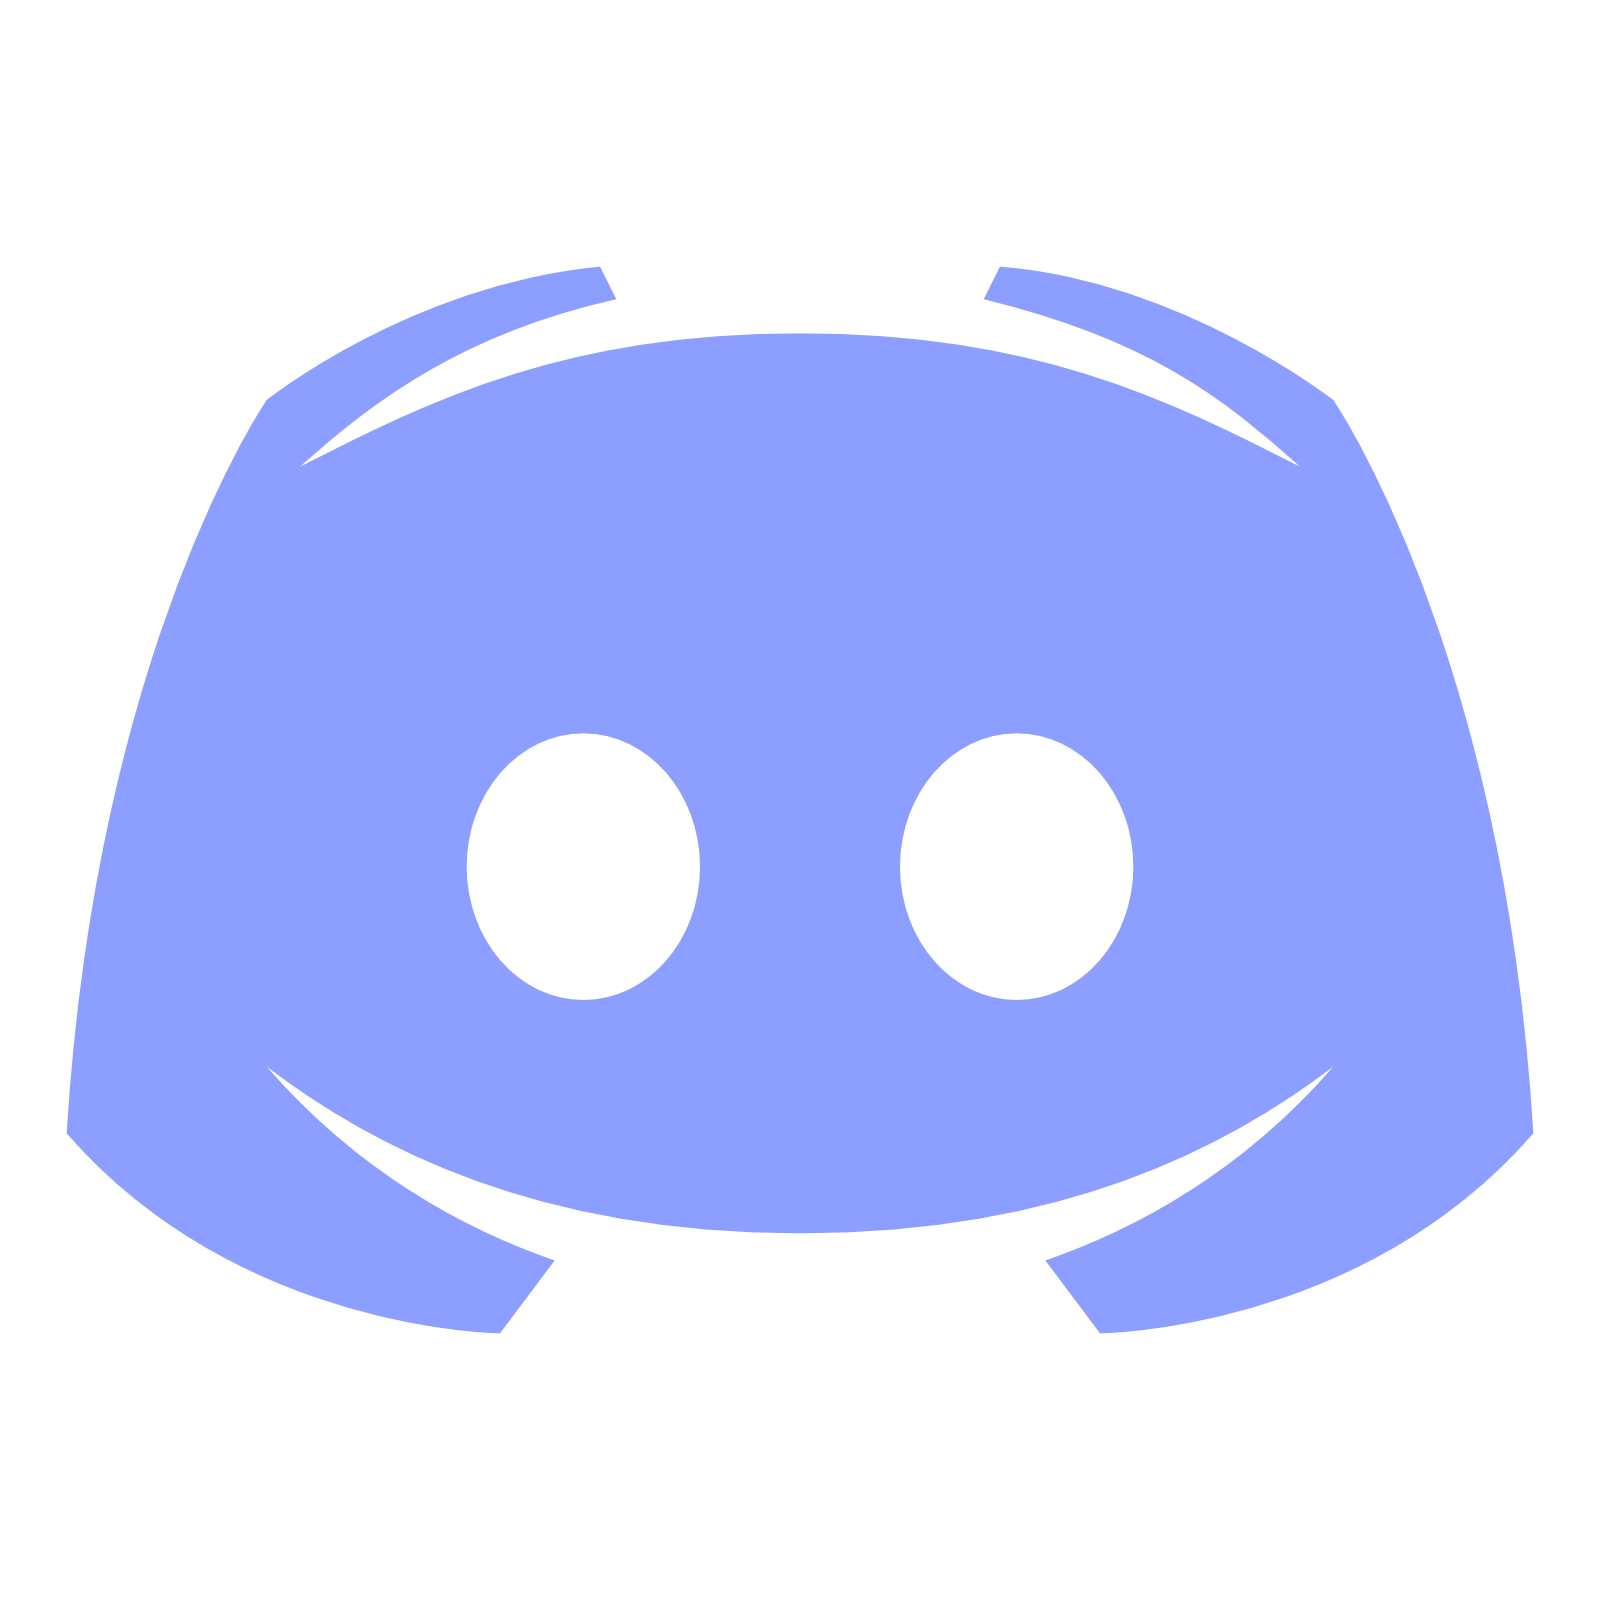 Download for discord chat gamers Laden Sie